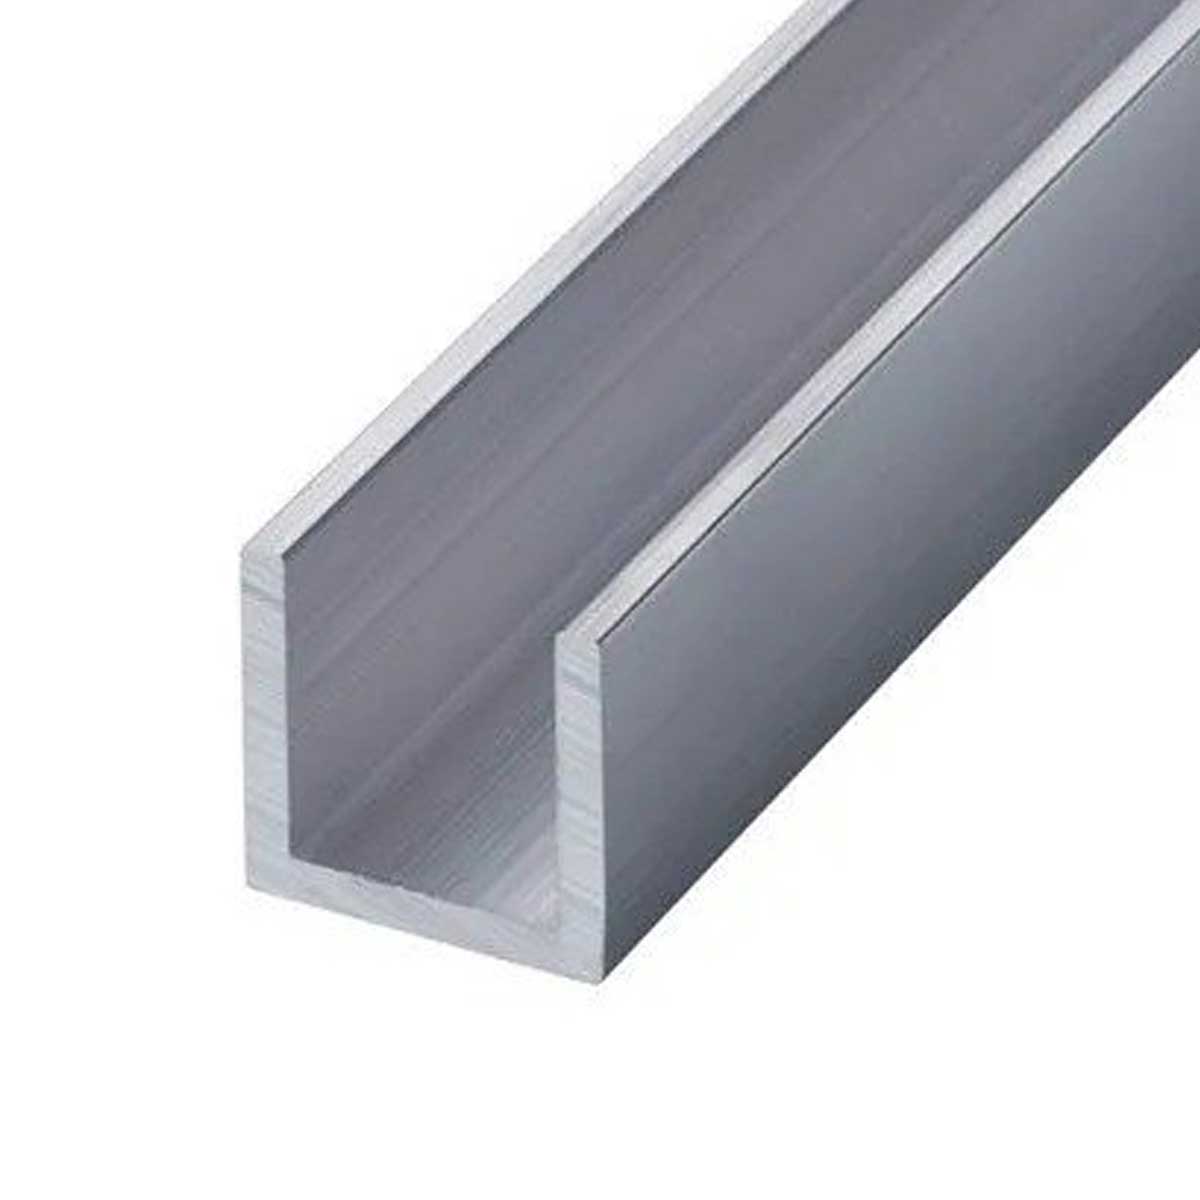 Aluminium C Channel For Construction Manufacturers, Suppliers in Jaisalmer